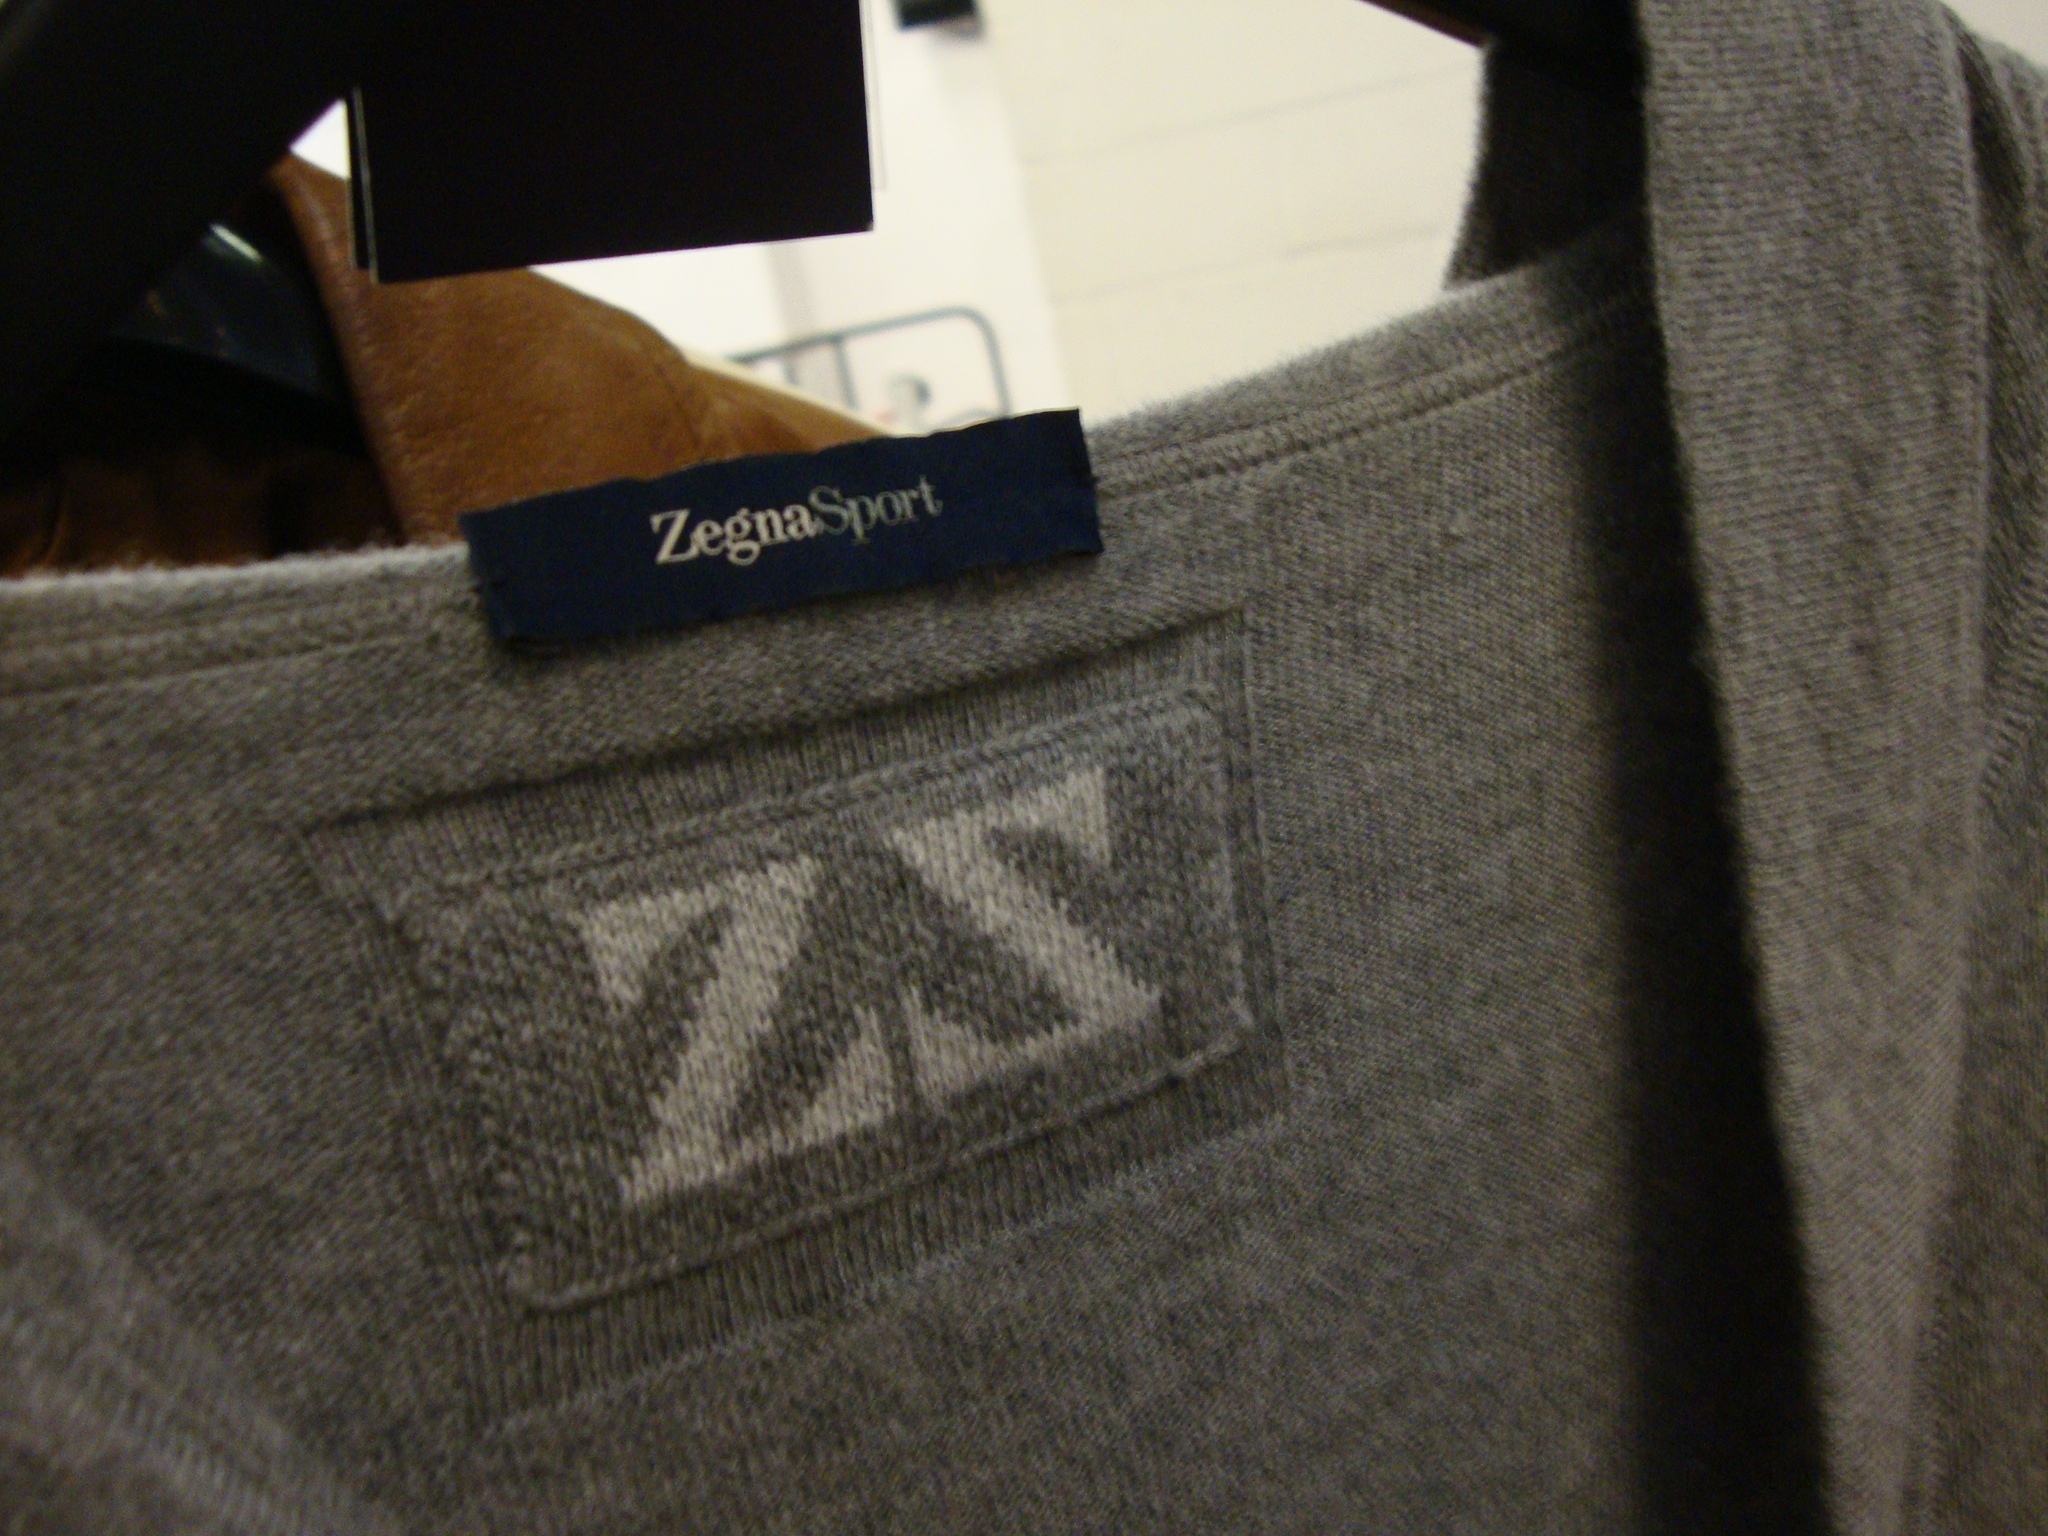 Zegna Sport button-up hooded top in cashmere/cotton mix, size XXXL, colour pale grey, originally - Image 2 of 3